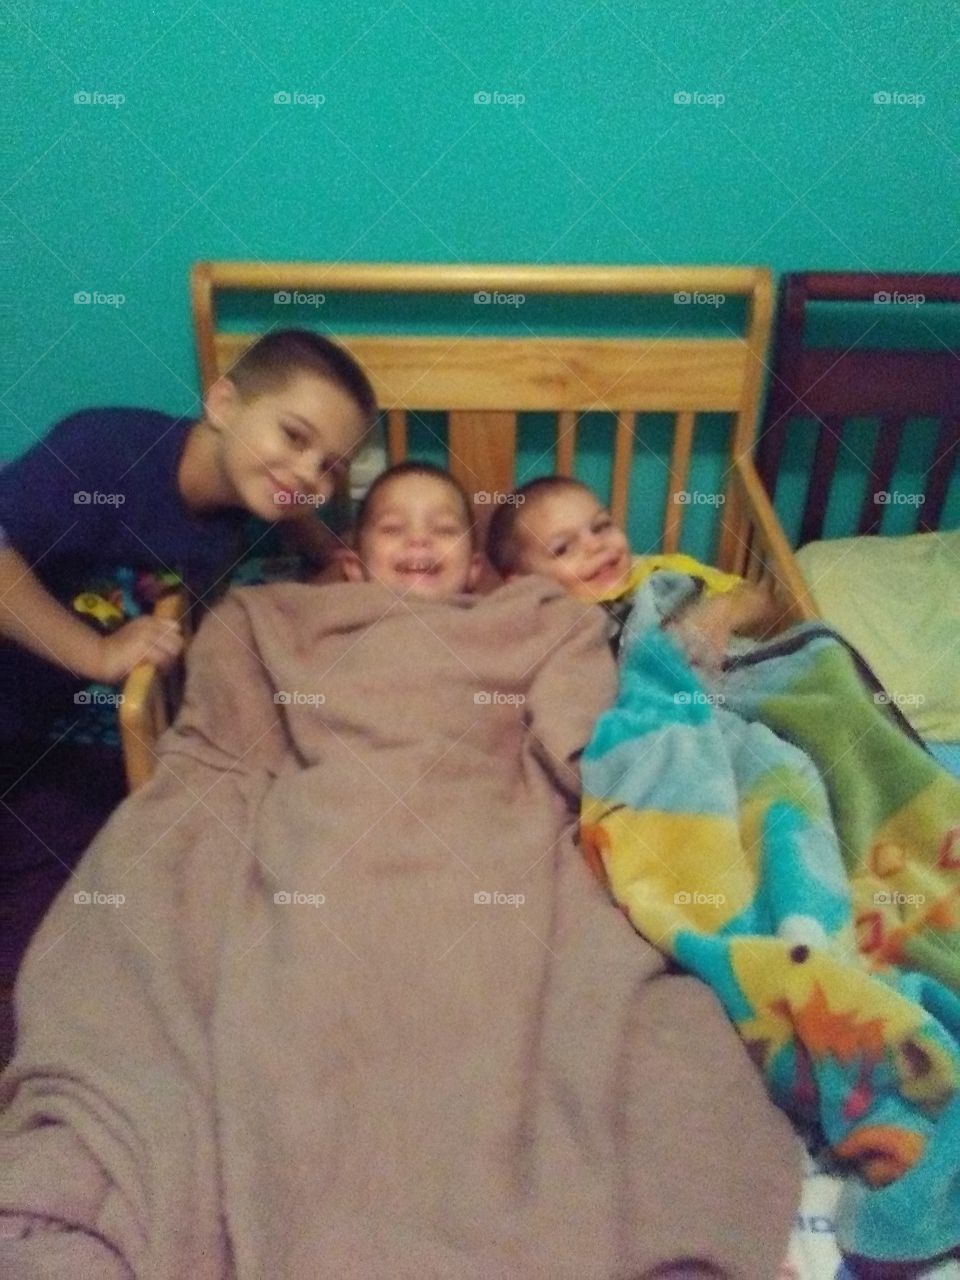 these three boys two in the bed they are sons of my son baby cheesing loving to take this picture in their room was Playing now laying down cute as a bug in a rug. Group together happy times close together these are my offspring's seed of my seed son